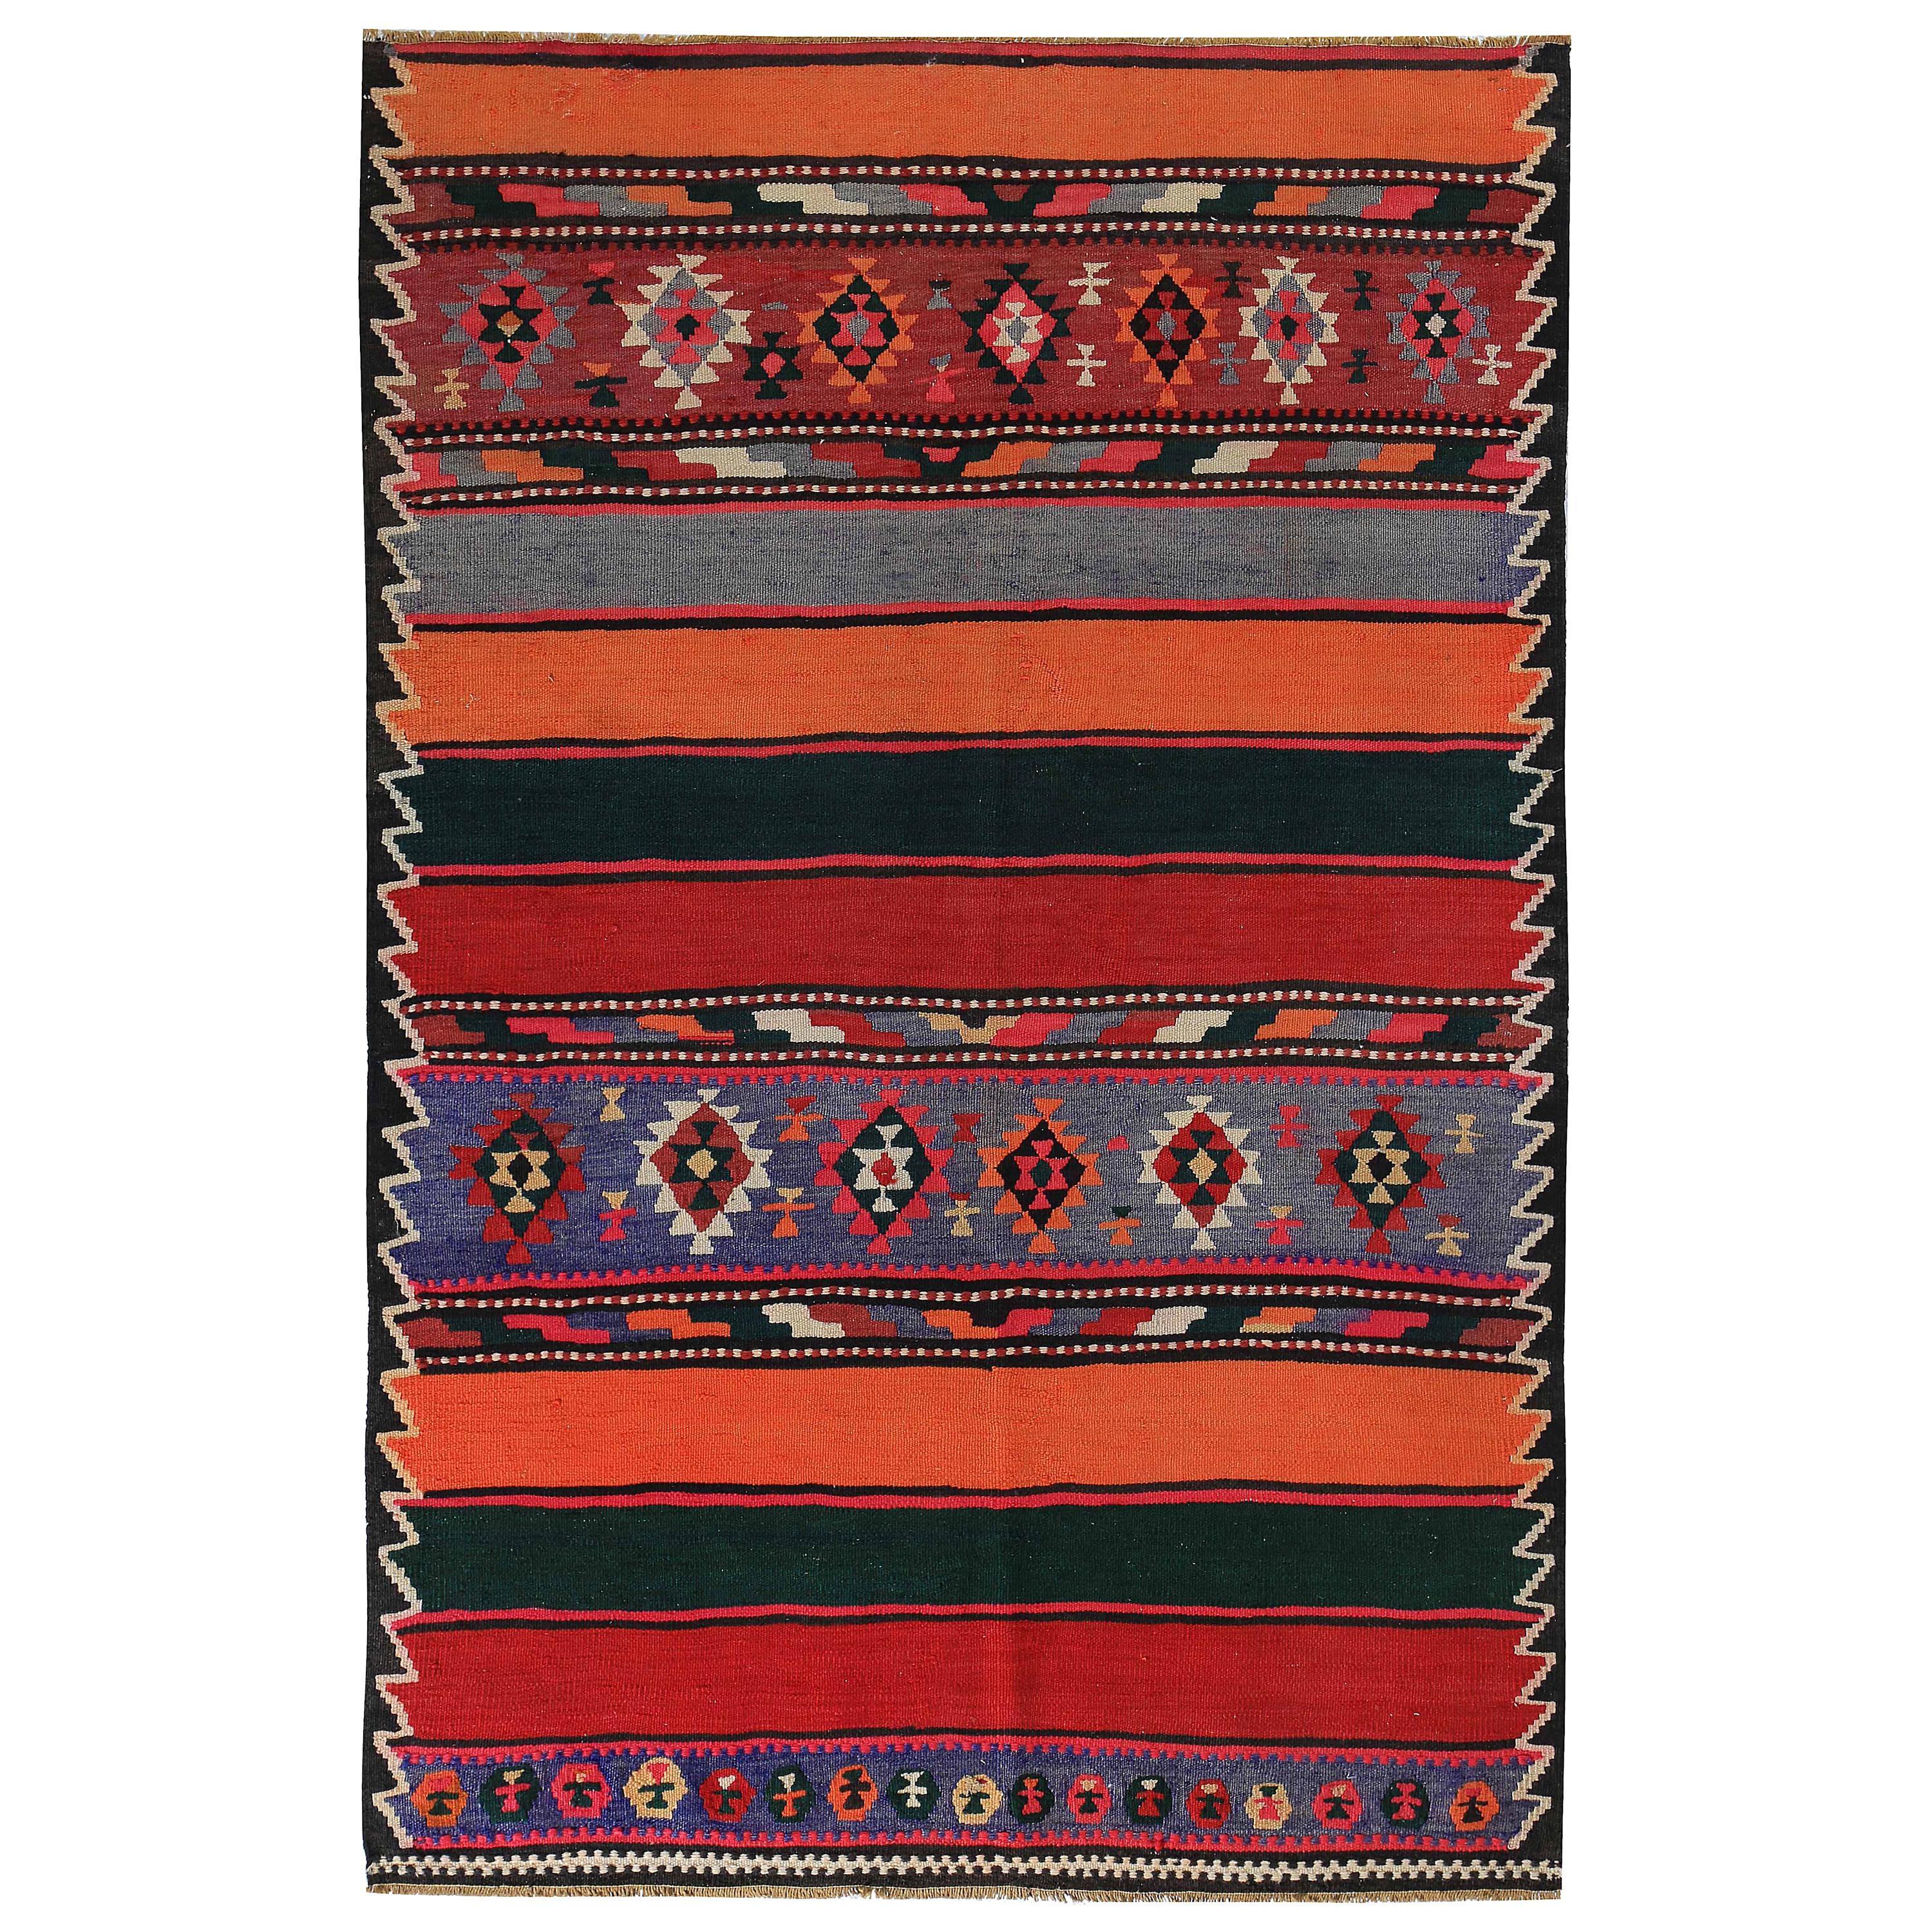 Turkish Kilim Rug with Green and Red Stripes Decorated with Tribal Medallions